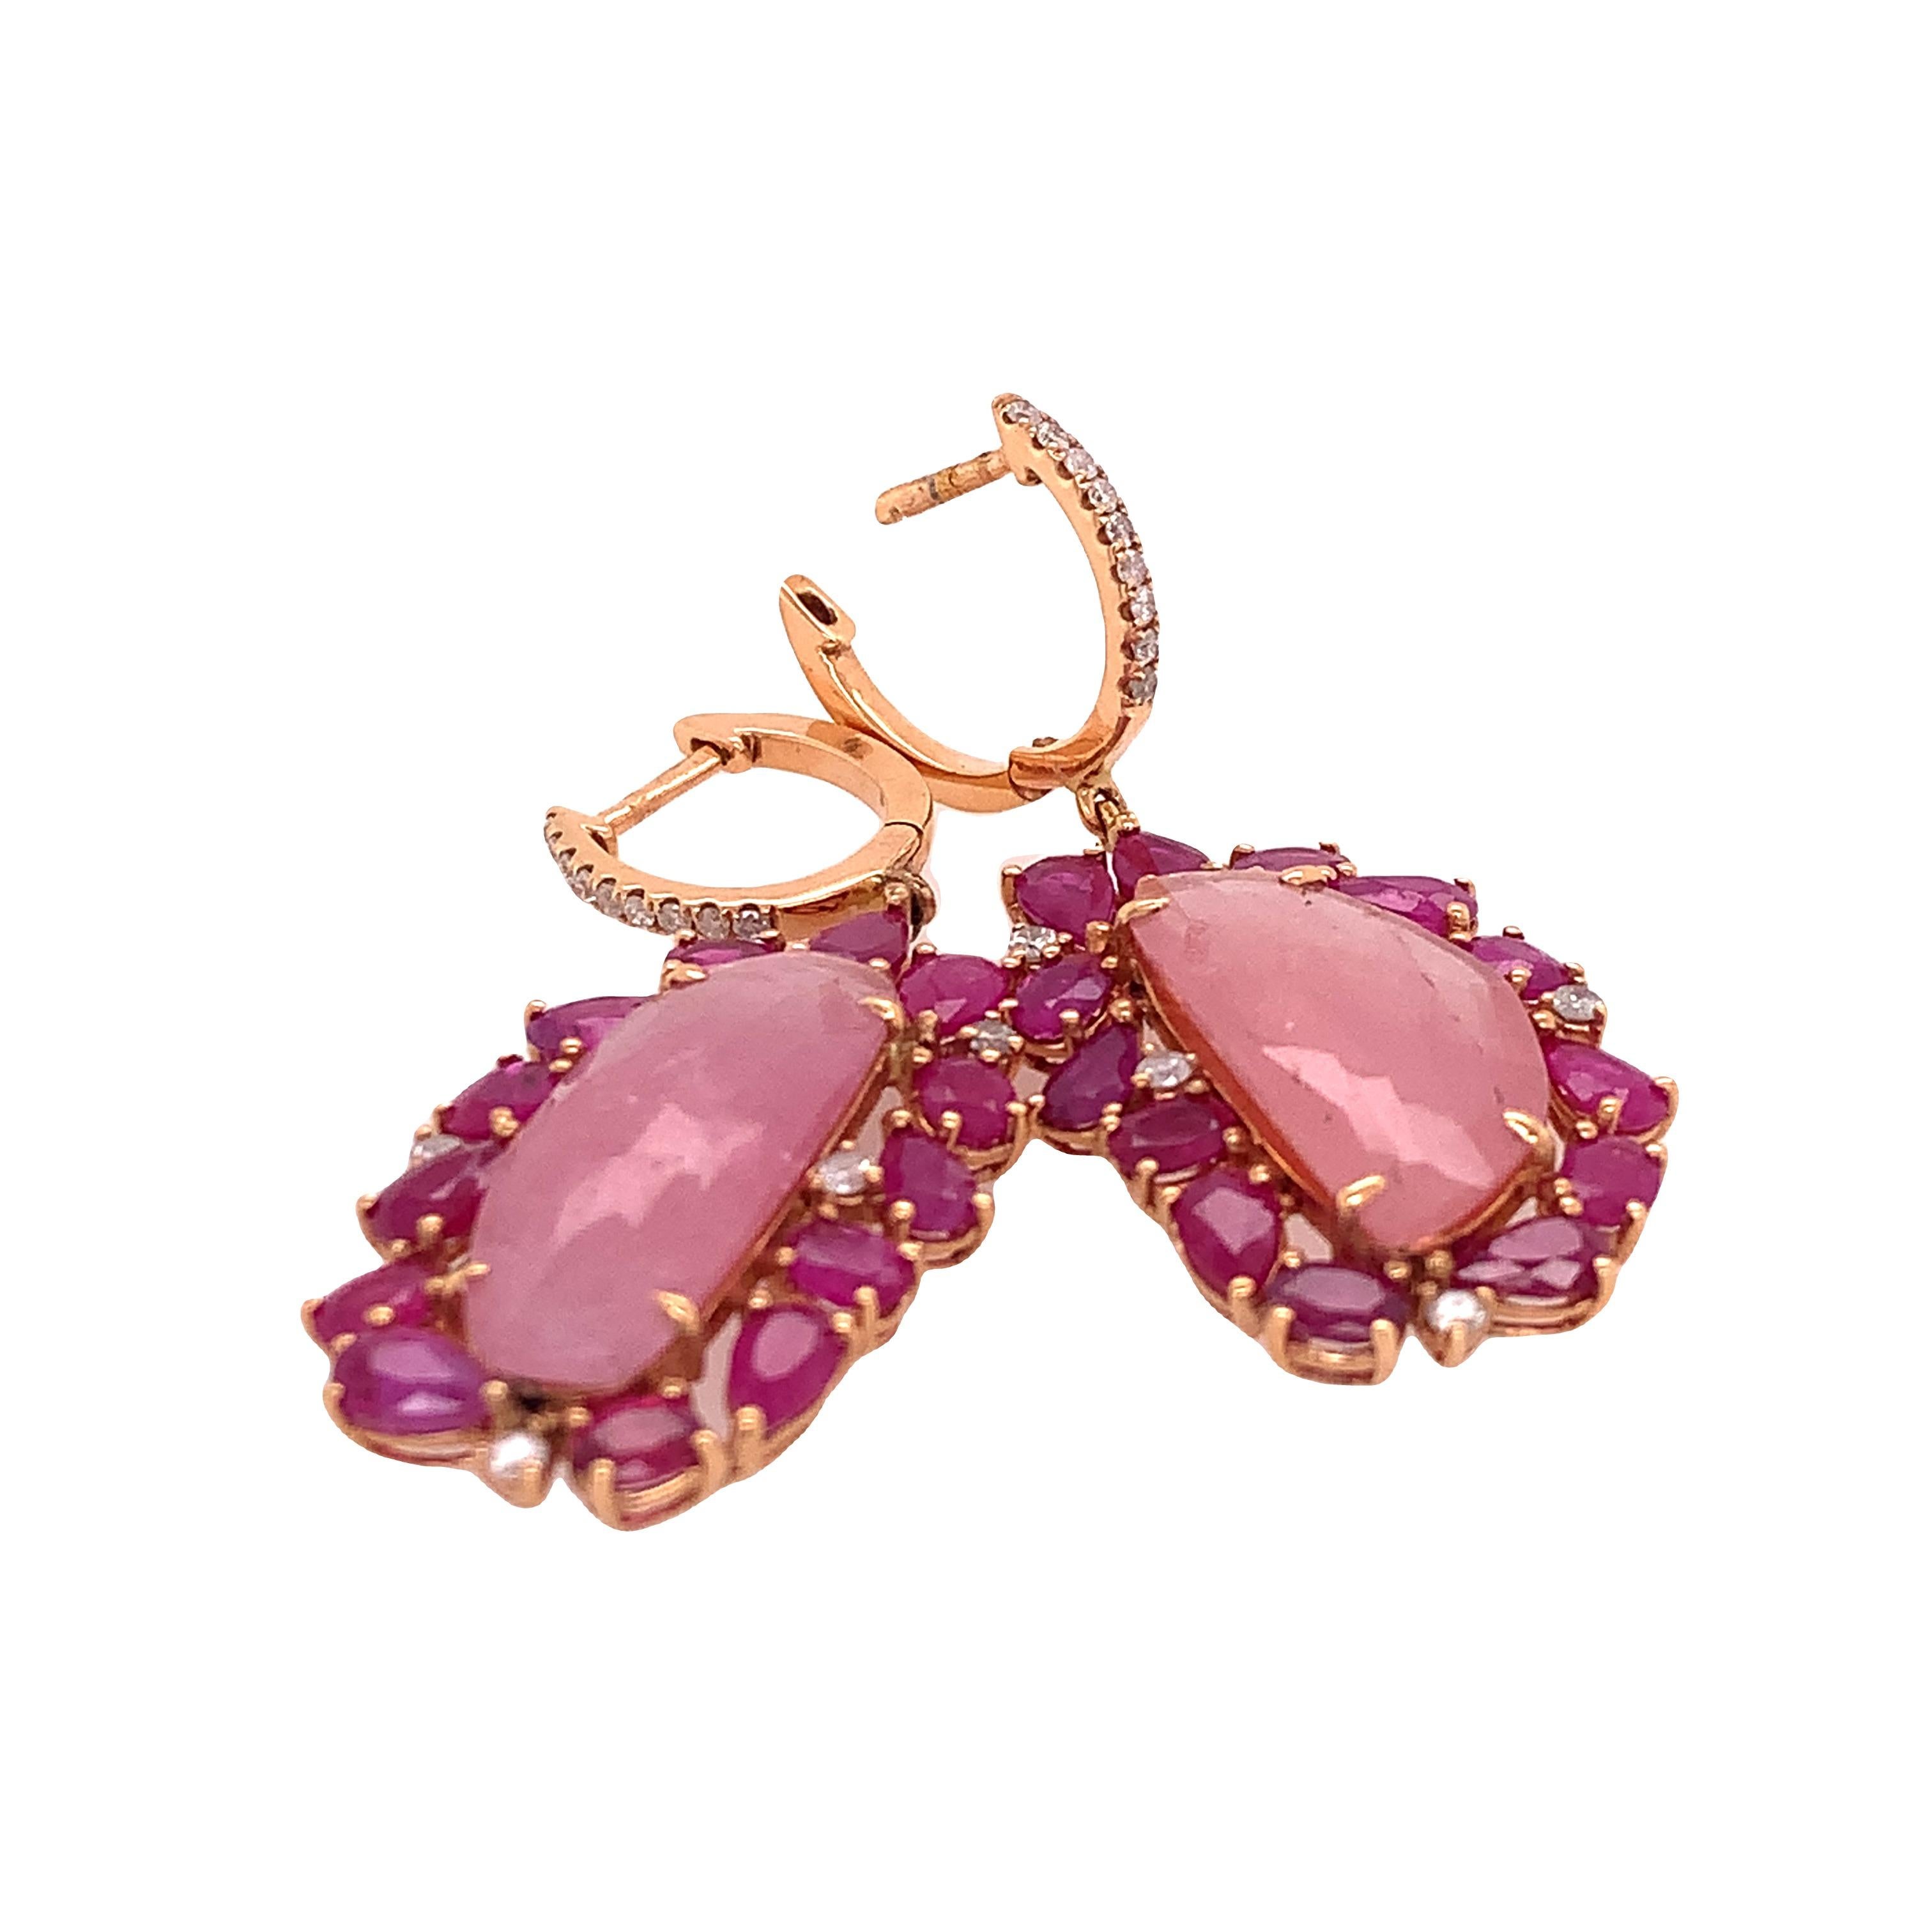 Lillipad Collection

This pair of earrings features Pink sapphire center surrounded by Ruby and Diamond accents set in 18K yellow gold. This drop earrings is light and  perfect for everyday wear.

Pink Sapphire: 18.44ct total weight.
Ruby: 6.83ct